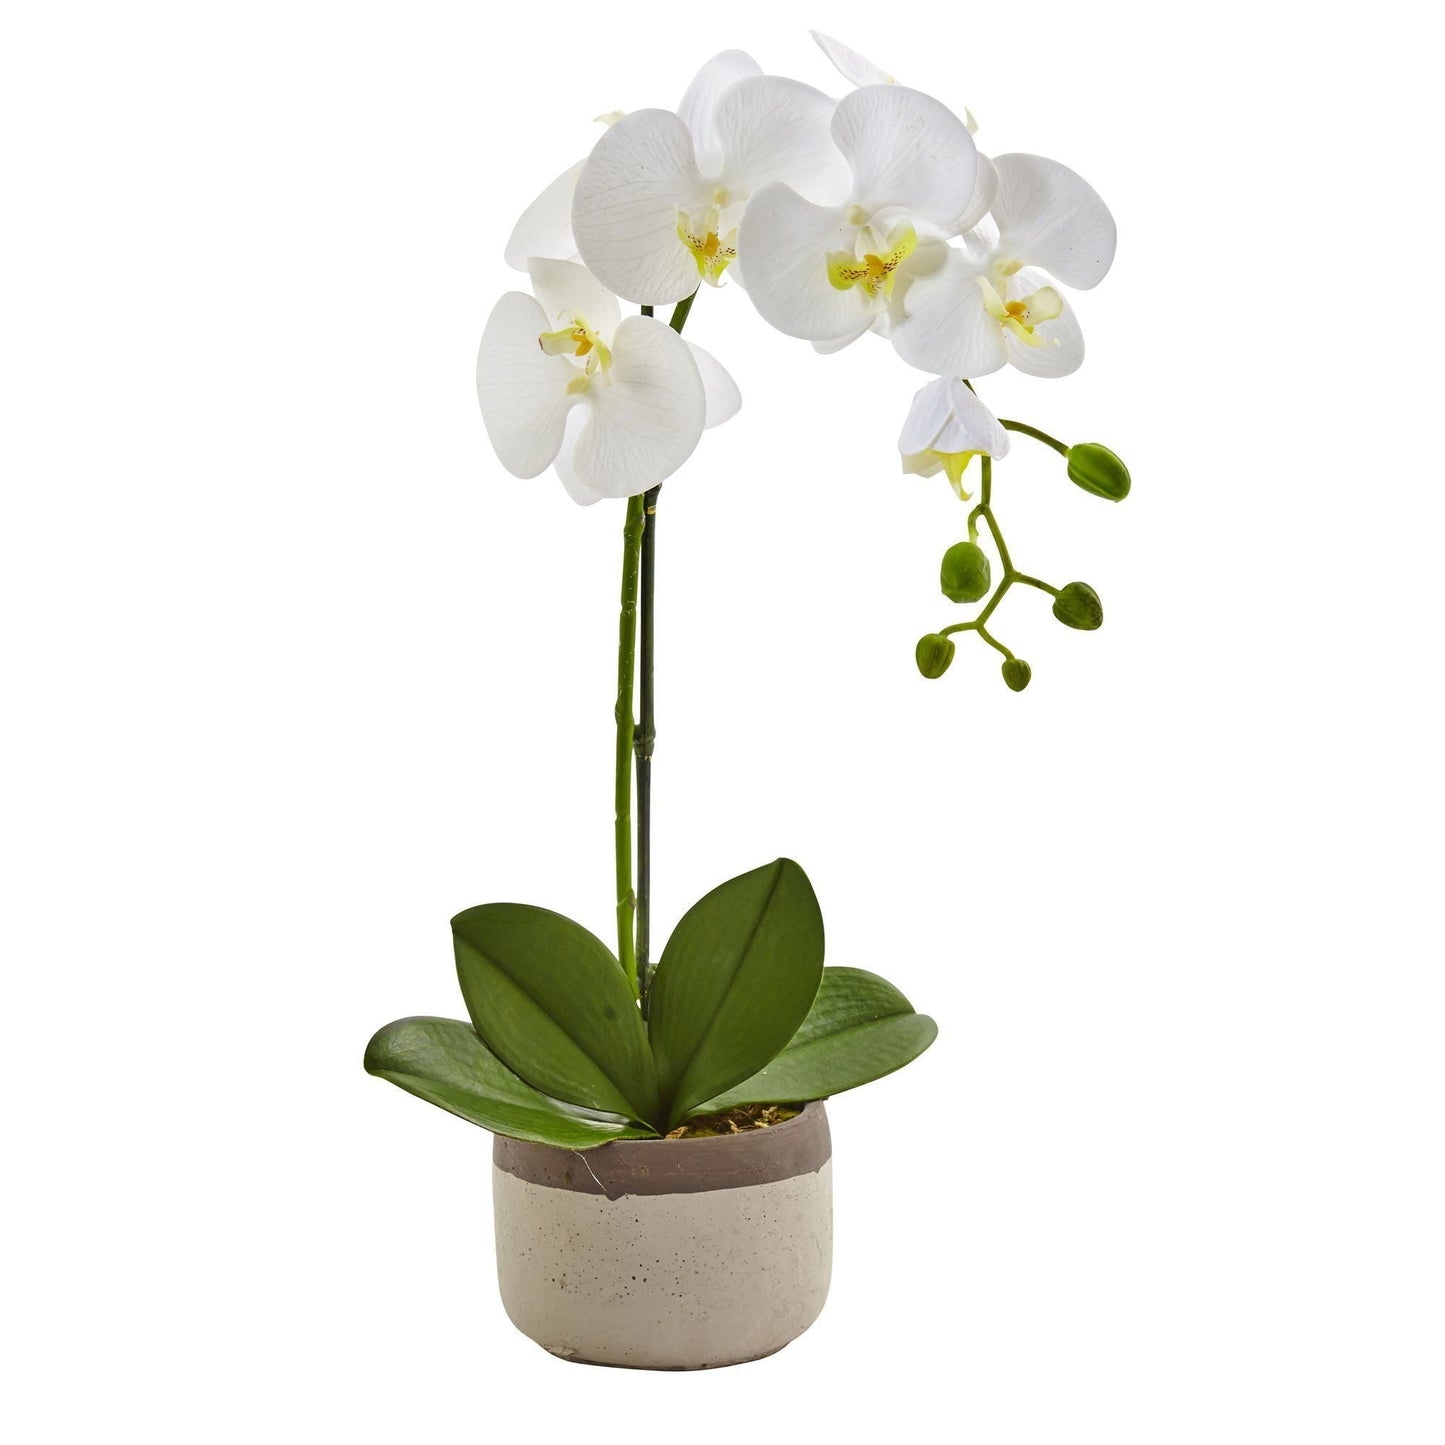 Phalaenopsis Orchid in Ceramic Pot by Nearly Natural